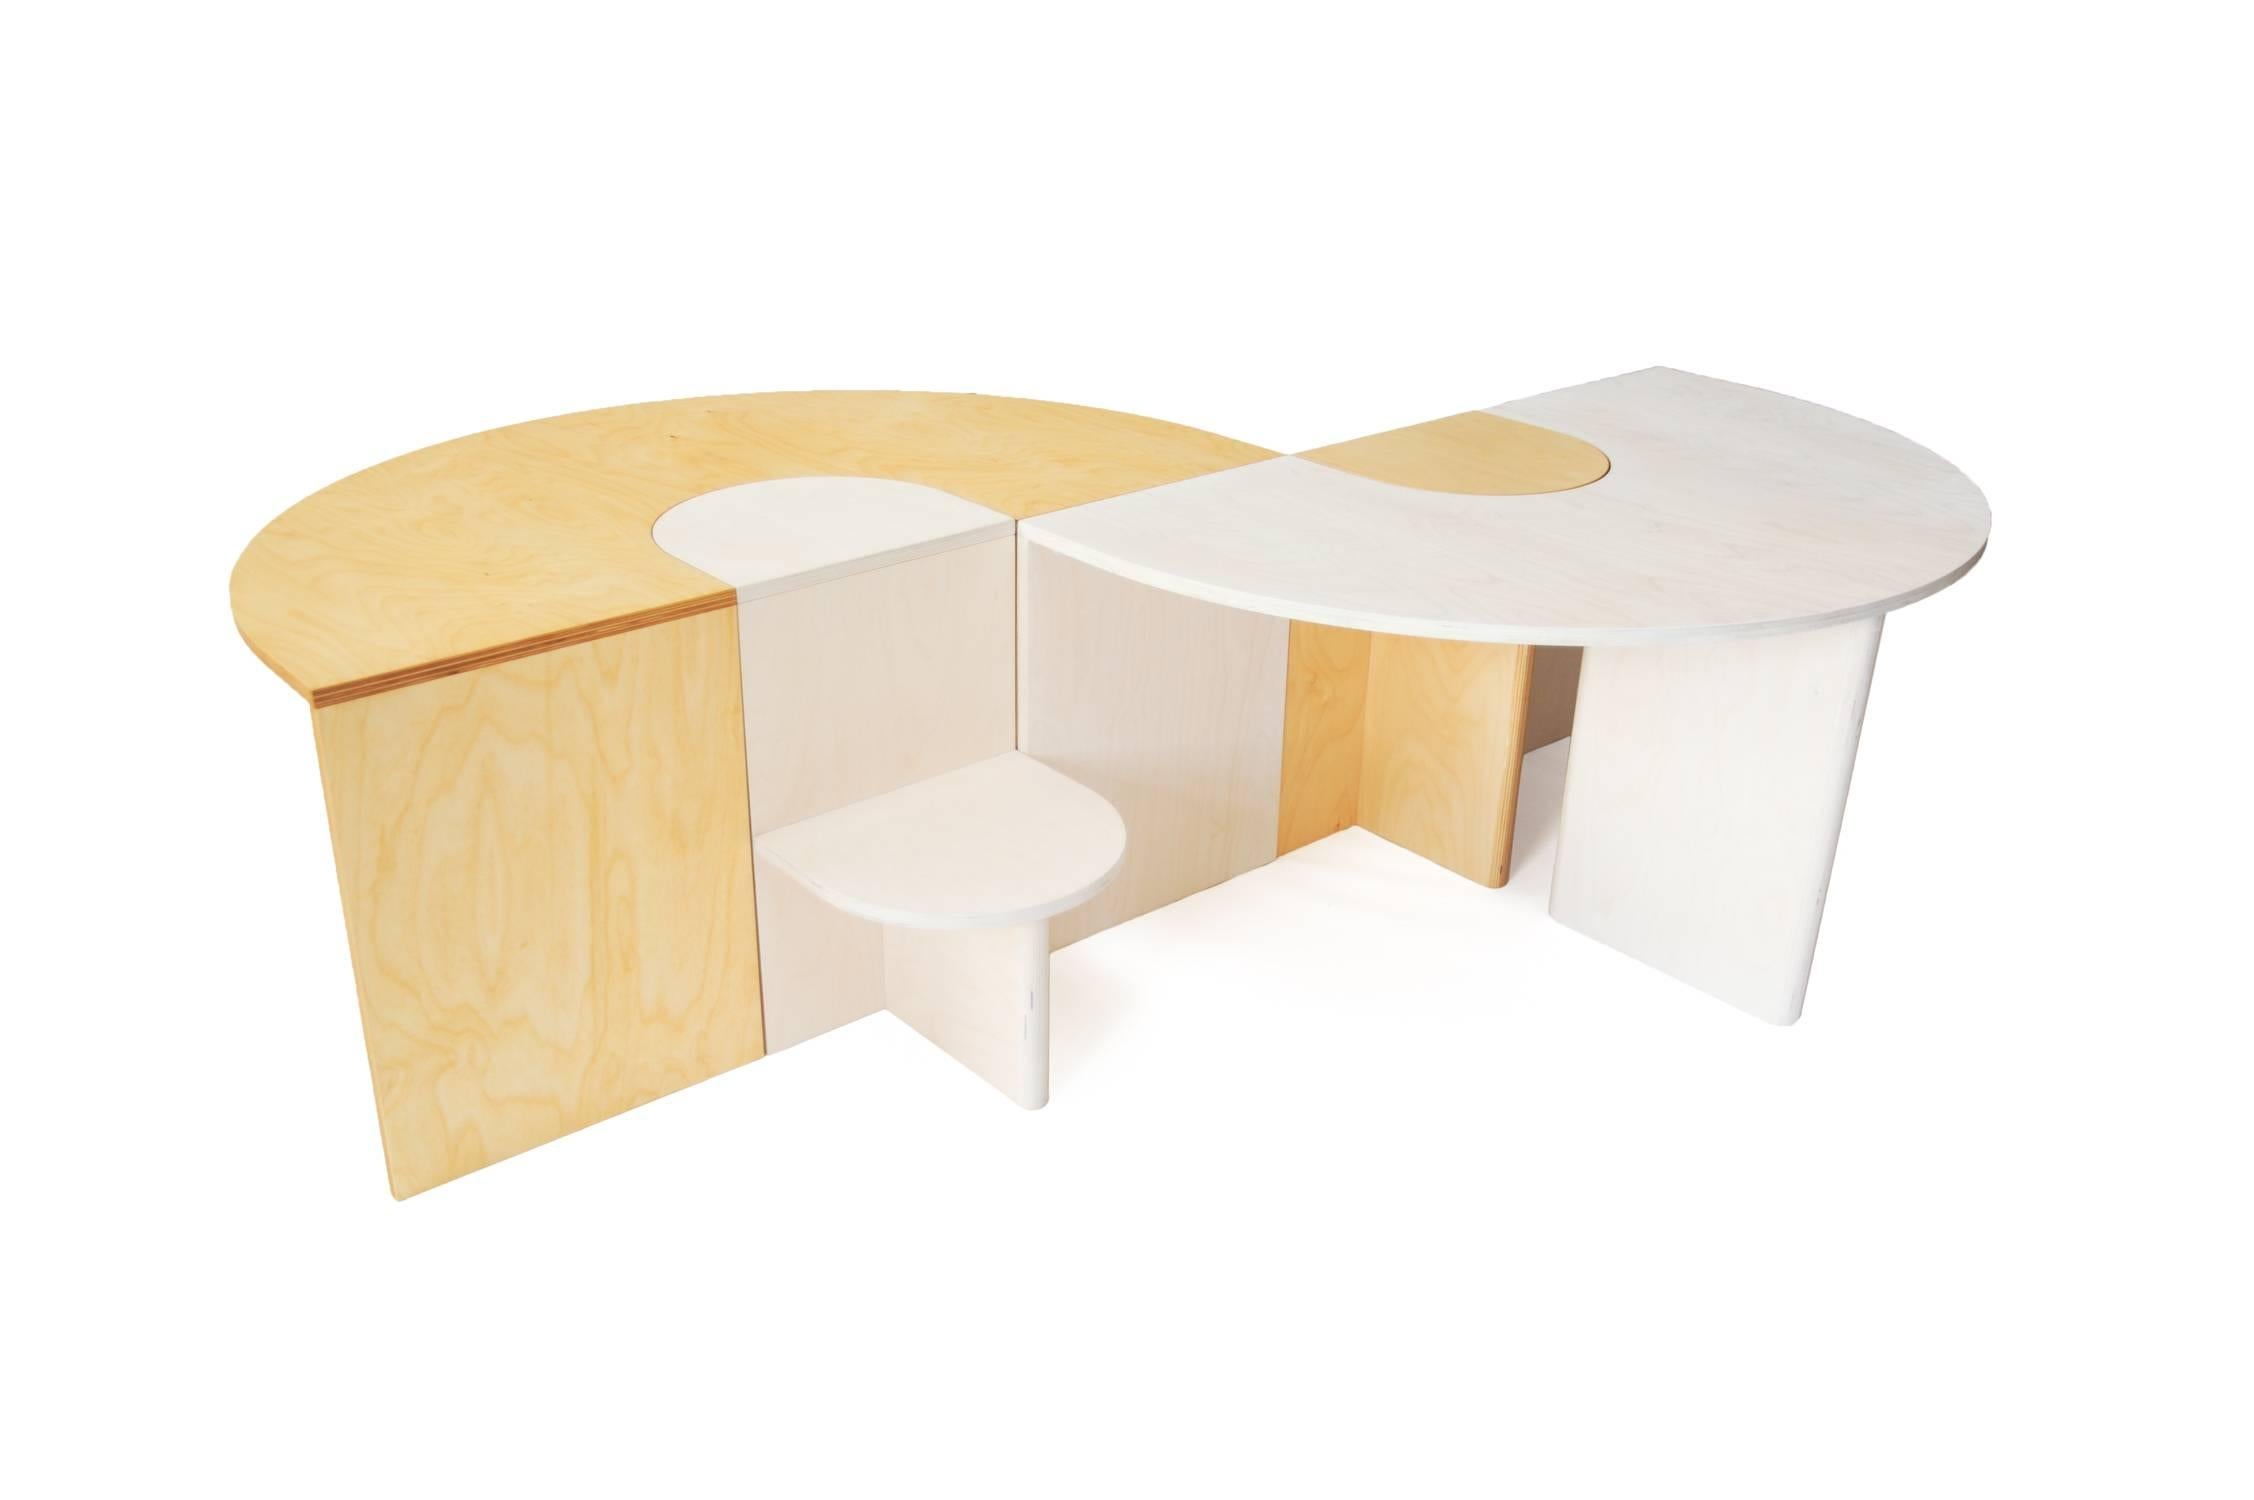 American Lunar Table by Kinder Modern in Birch Plywood, USA, 2017 For Sale